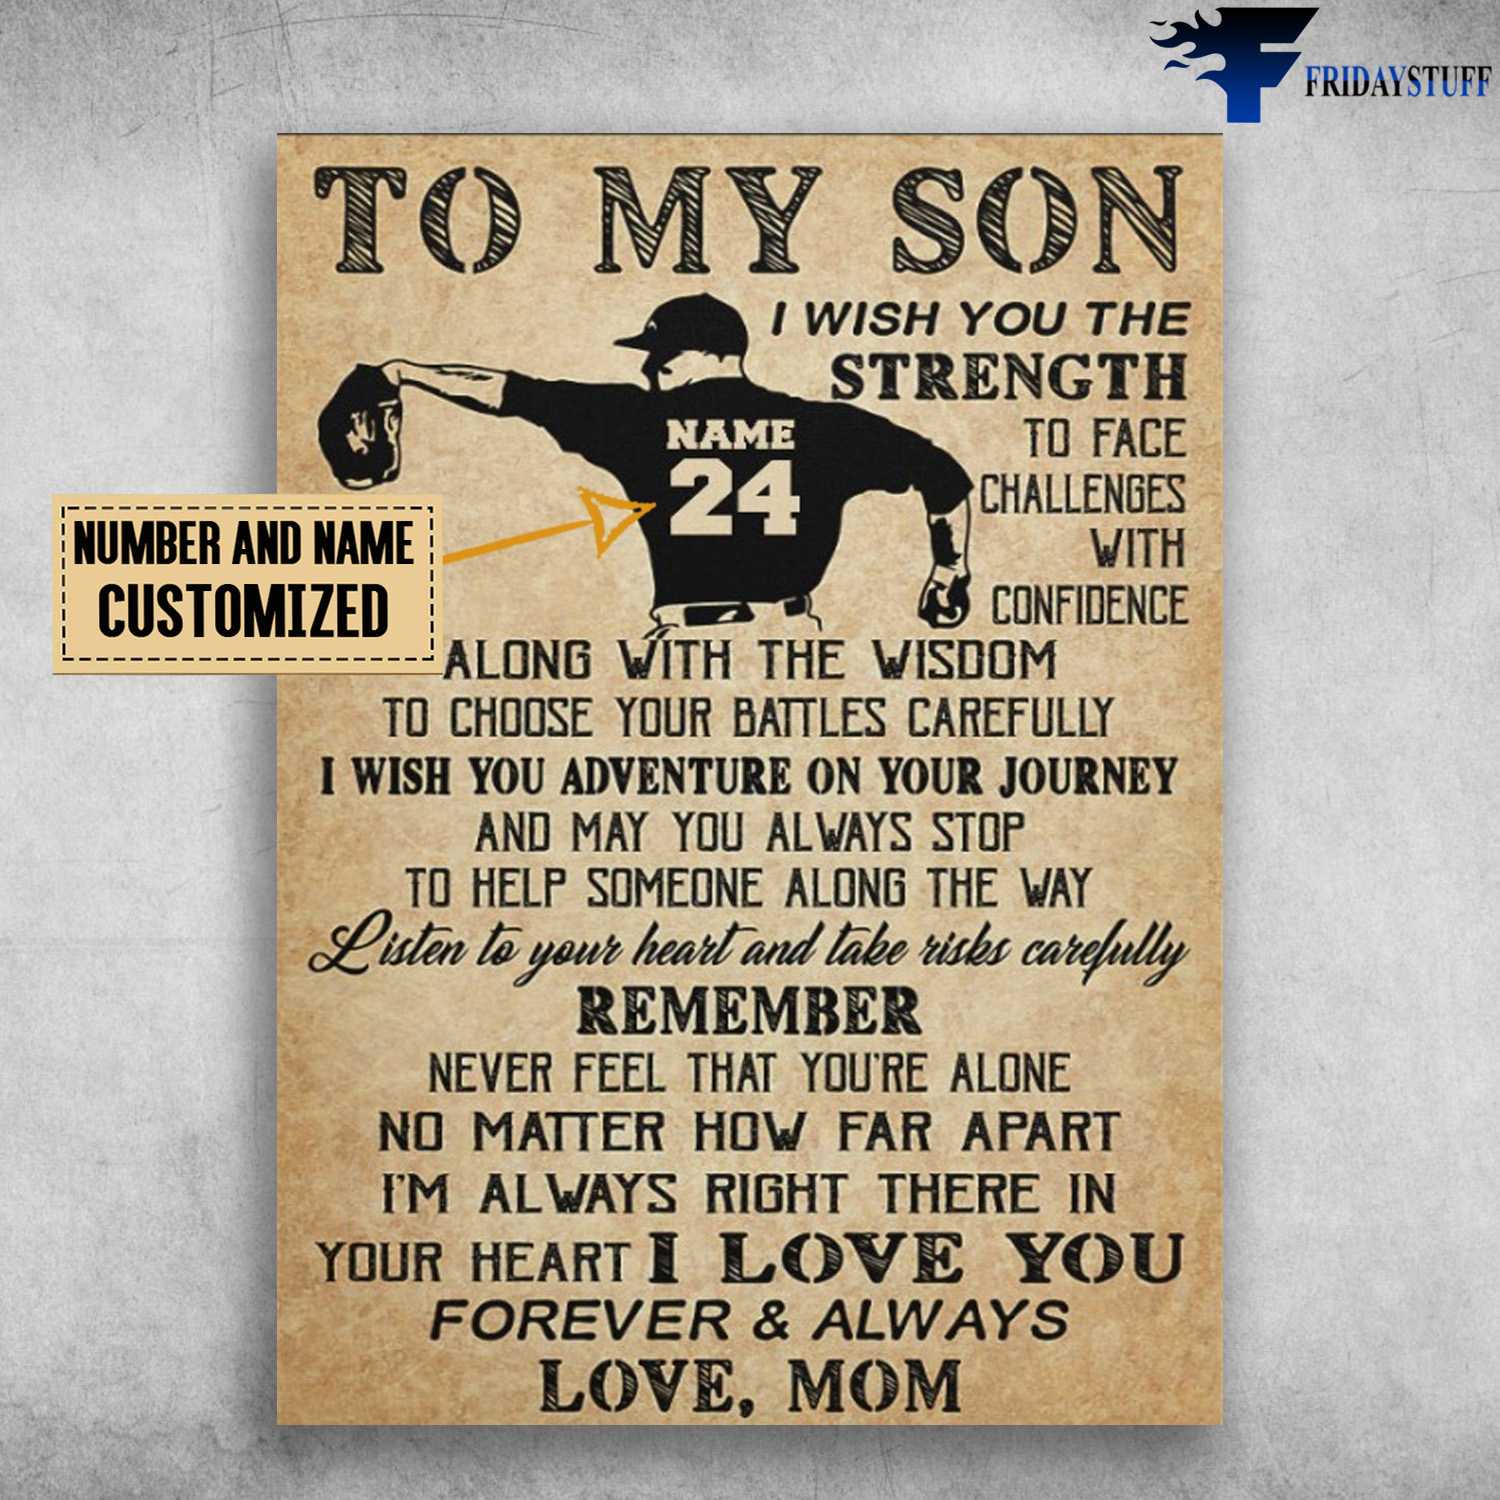 Baseball Son, Baseball Poster, Mom And Son, To My Son, I Wish You The Strength, To Face Challenges With Confidence, Along With The Wisdom, To Choose Your Battles Carefully